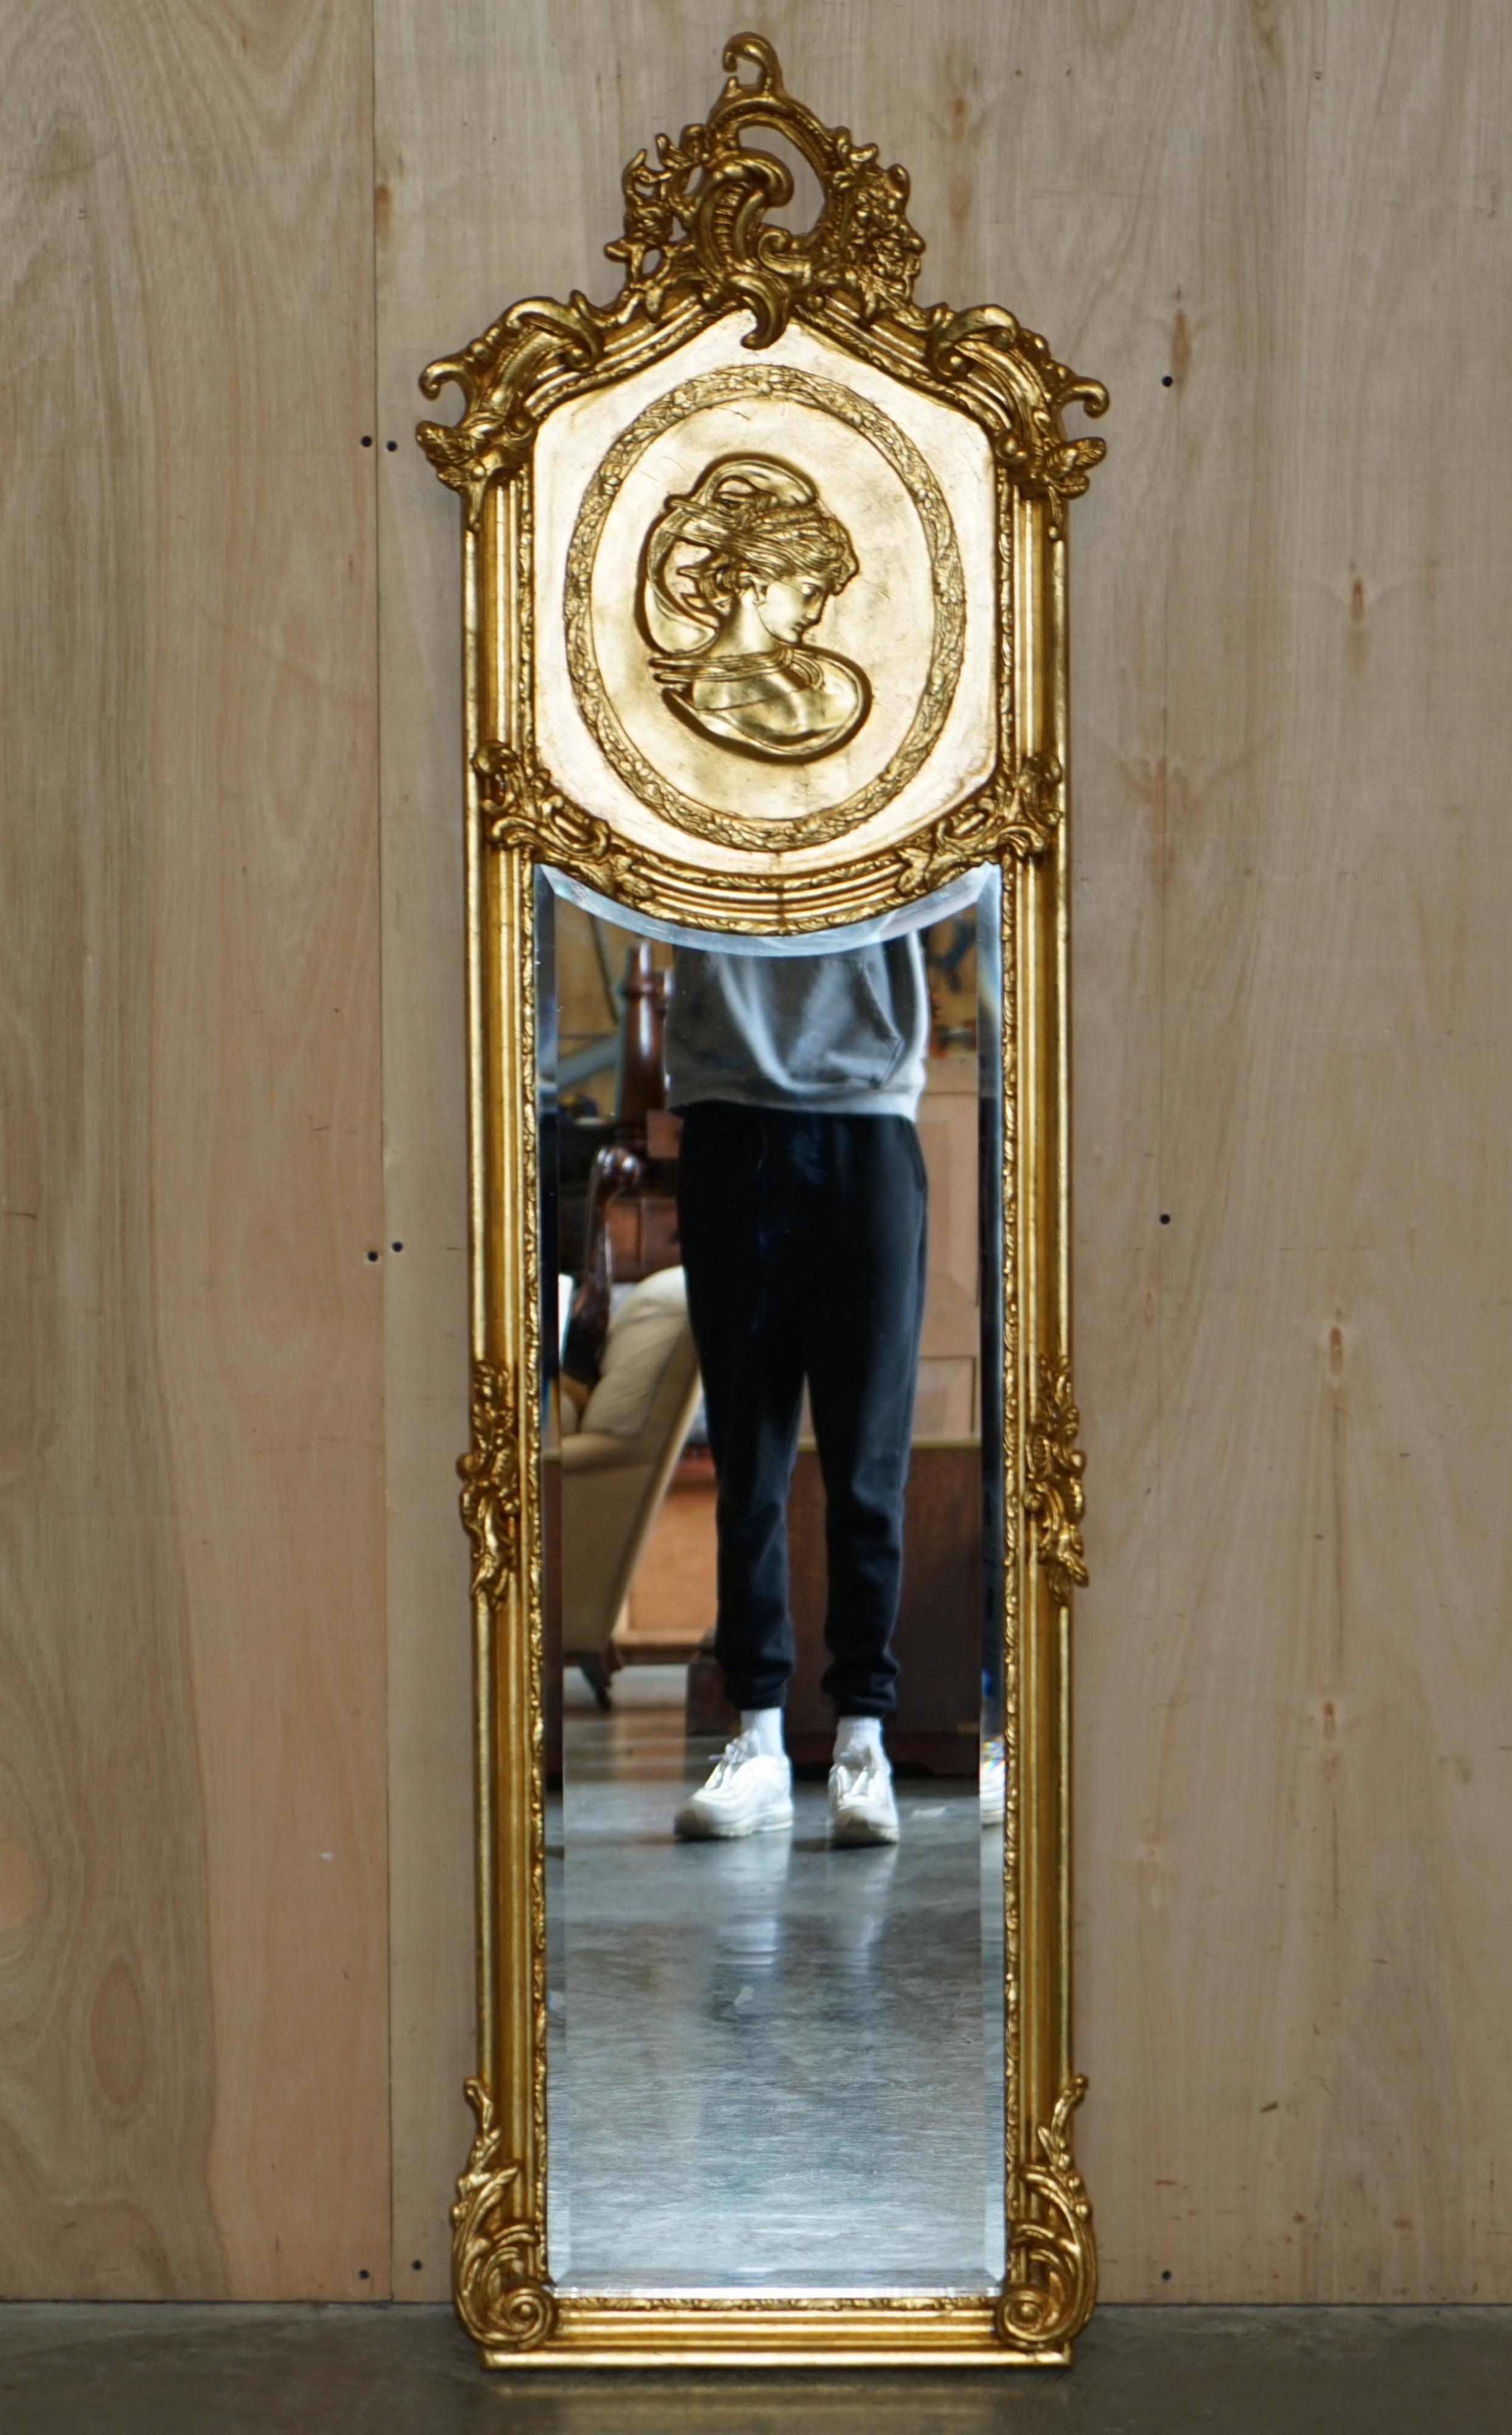 We are delighted to offer for sale this original lovely pair of mid-20th century French Neoclassical style giltwood framed mirrors

Both in lovely vintage condition, the giltwood is vibrant and adds a sense of Parisian opulence to any setting.